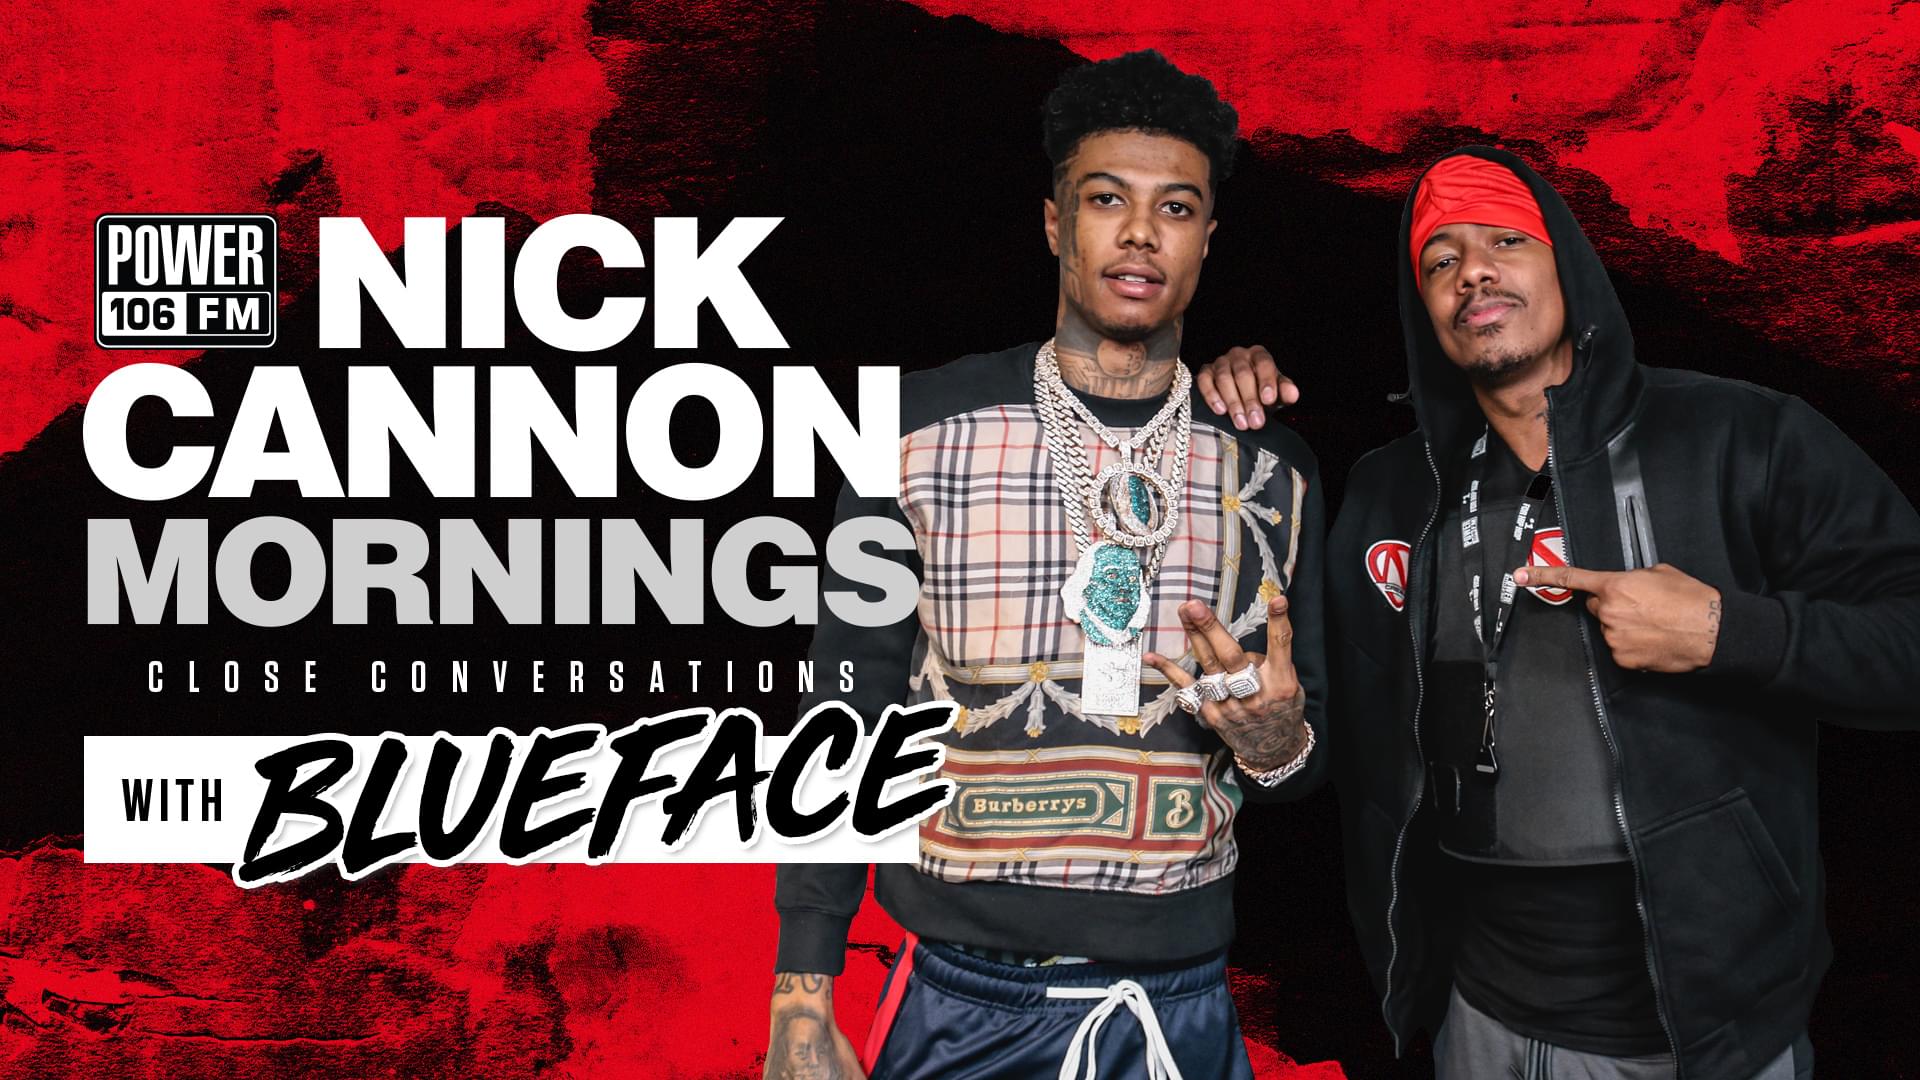 Blueface Says His Most Prized Possession Is His D***! Whew Chile!